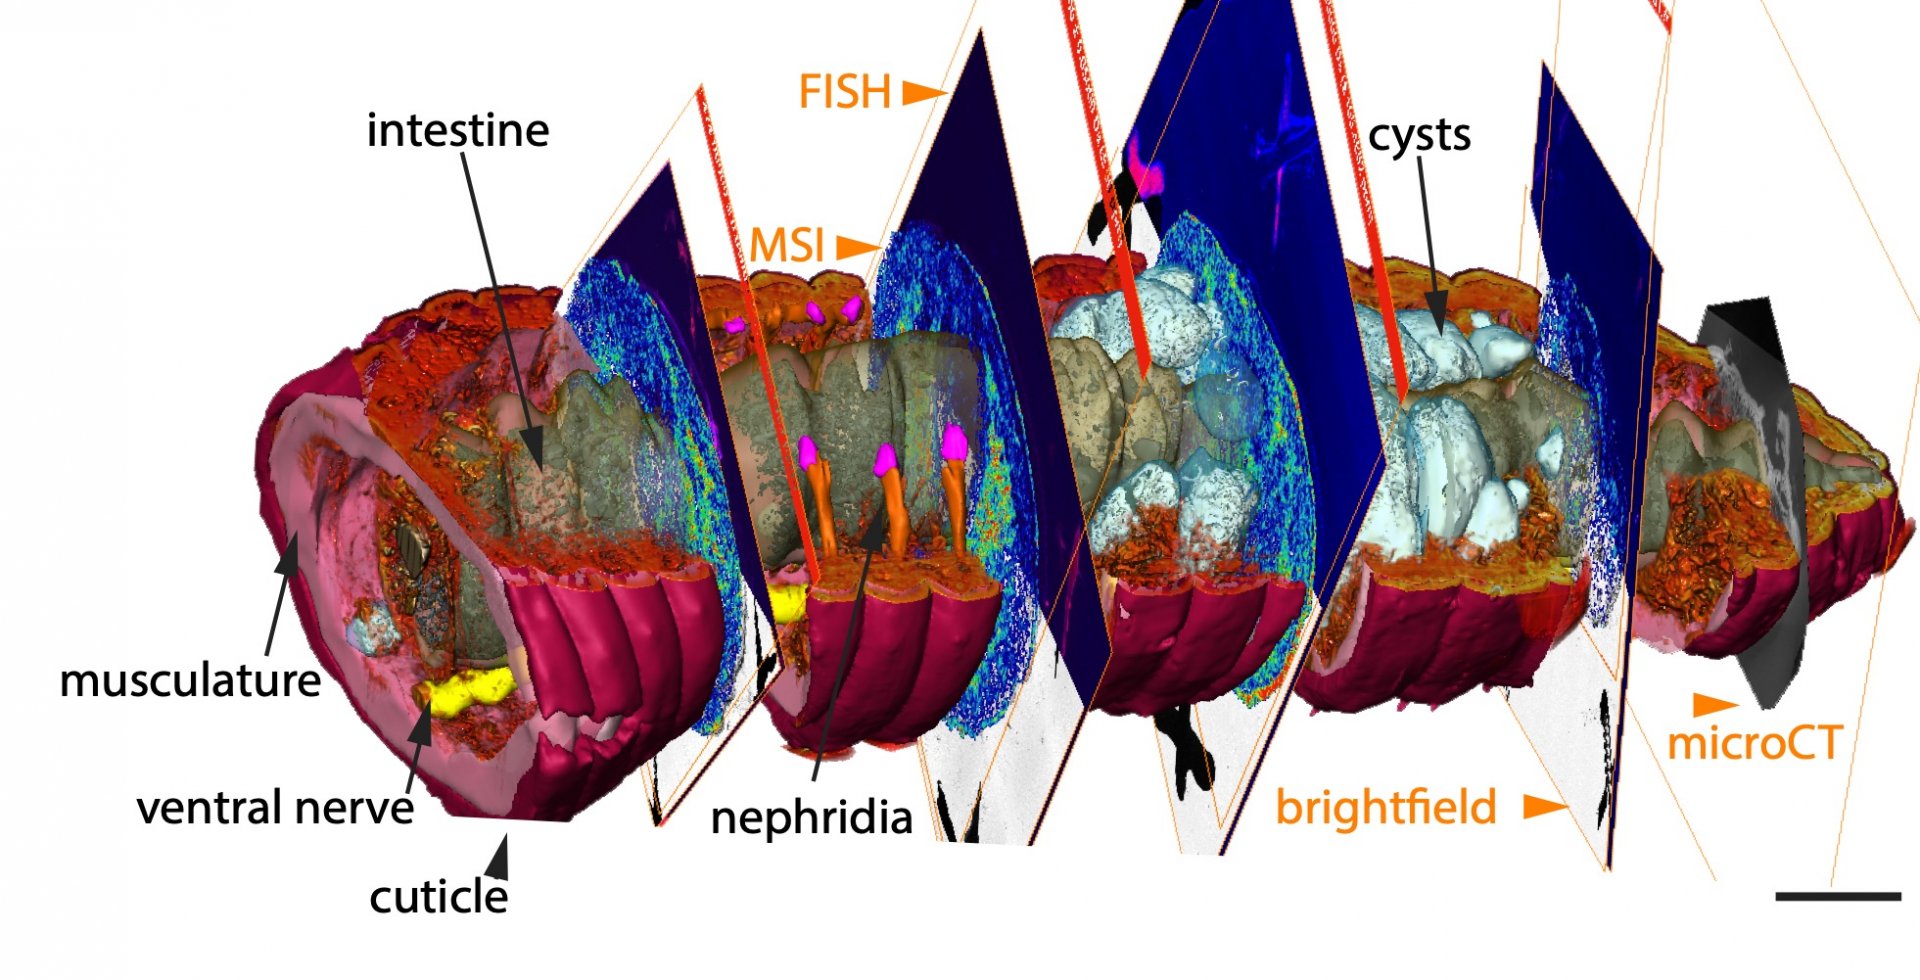 3D CHEMHIST atlas or the posterior end of an earthworm, used in this study. The atlas combines data of mass spectrometry imaging (MSI), fluorescence in situ hybridization (FISH) and microtomography (micro-CT). (© Max Planck Institute for Marine Microbiology/PNAS ref.)